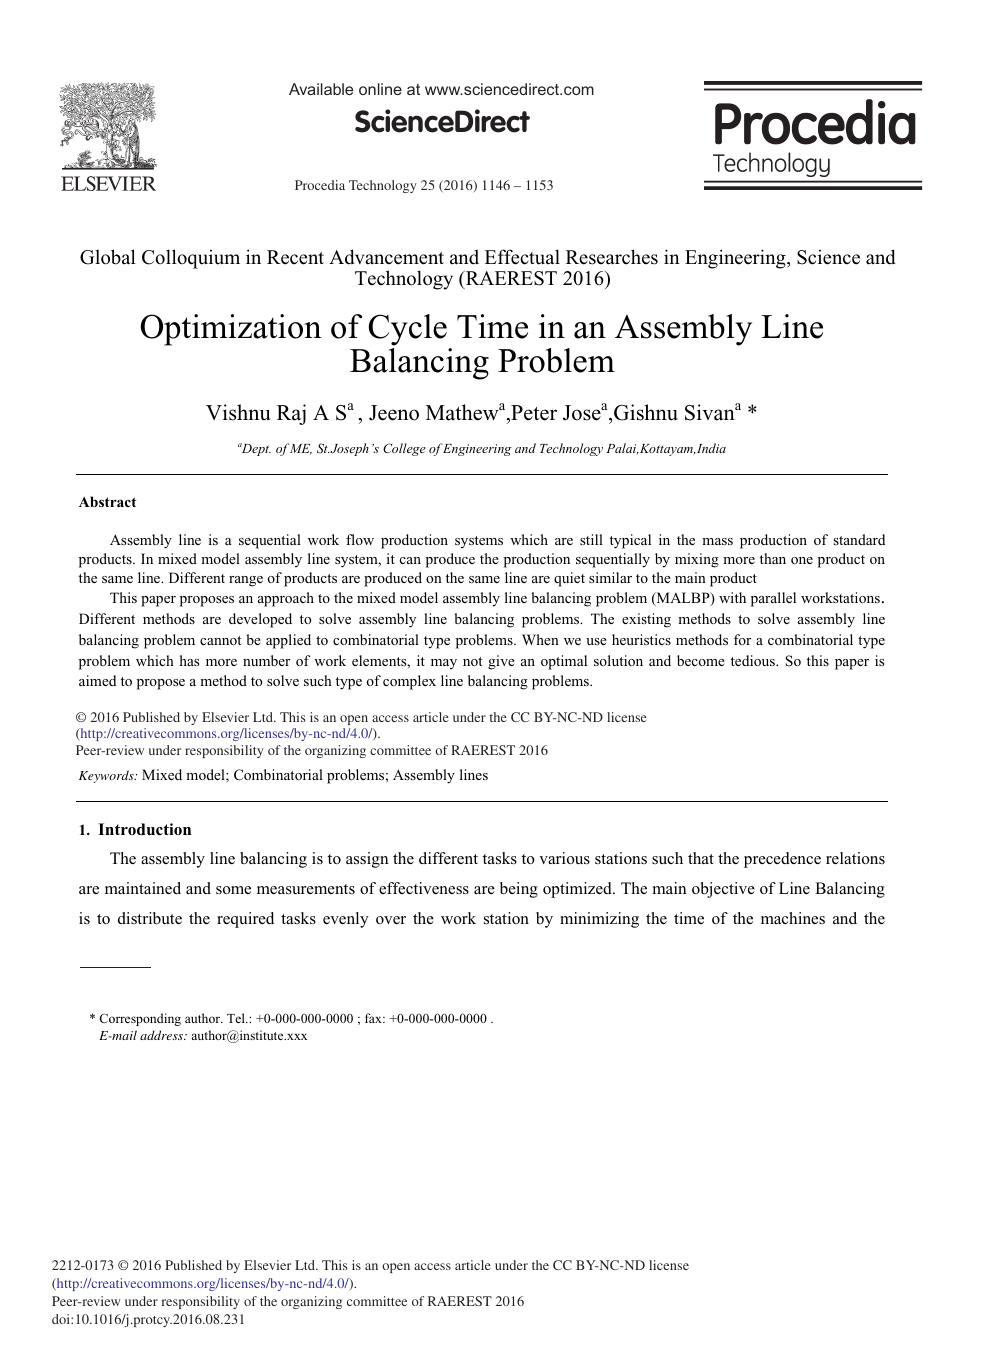 Optimization of Cycle Time in an Assembly Line Balancing Problem